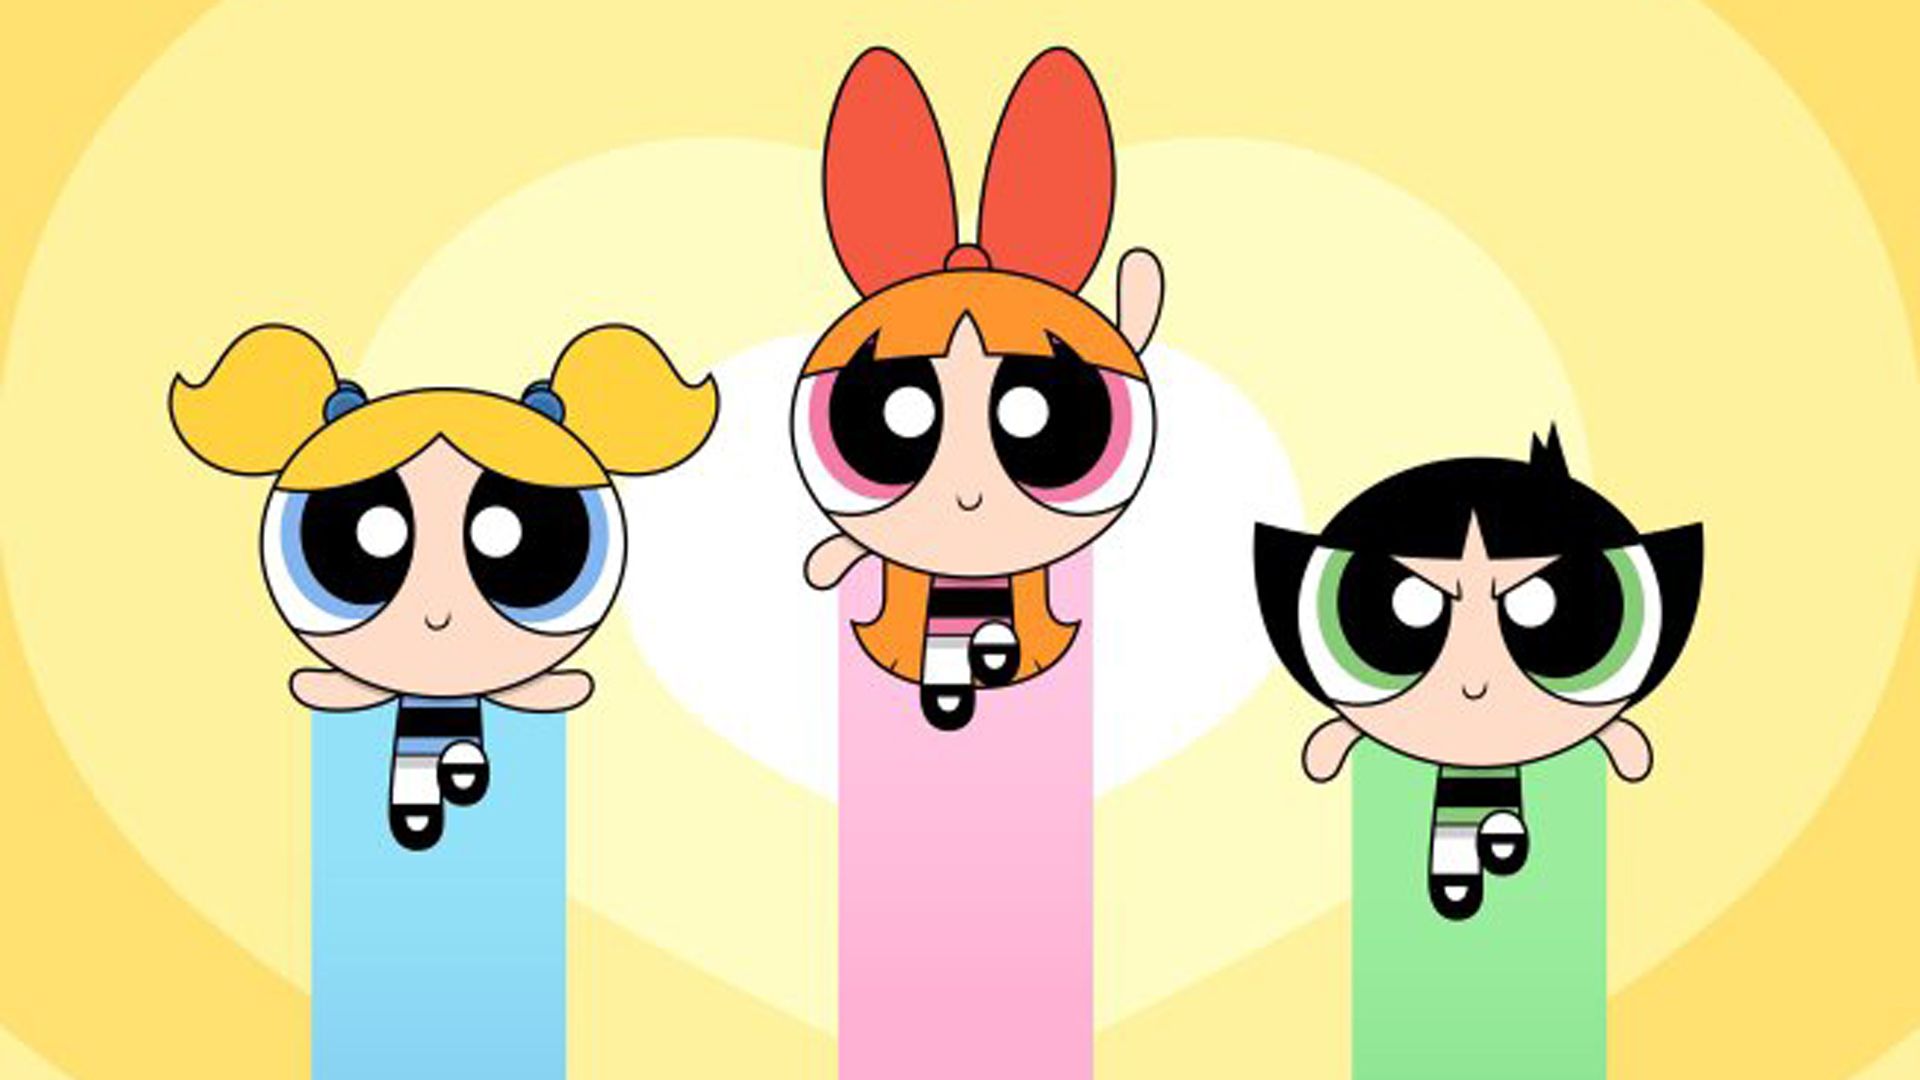 Ever wanted to turn yourself into a Powerpuff Girl? Now you can!